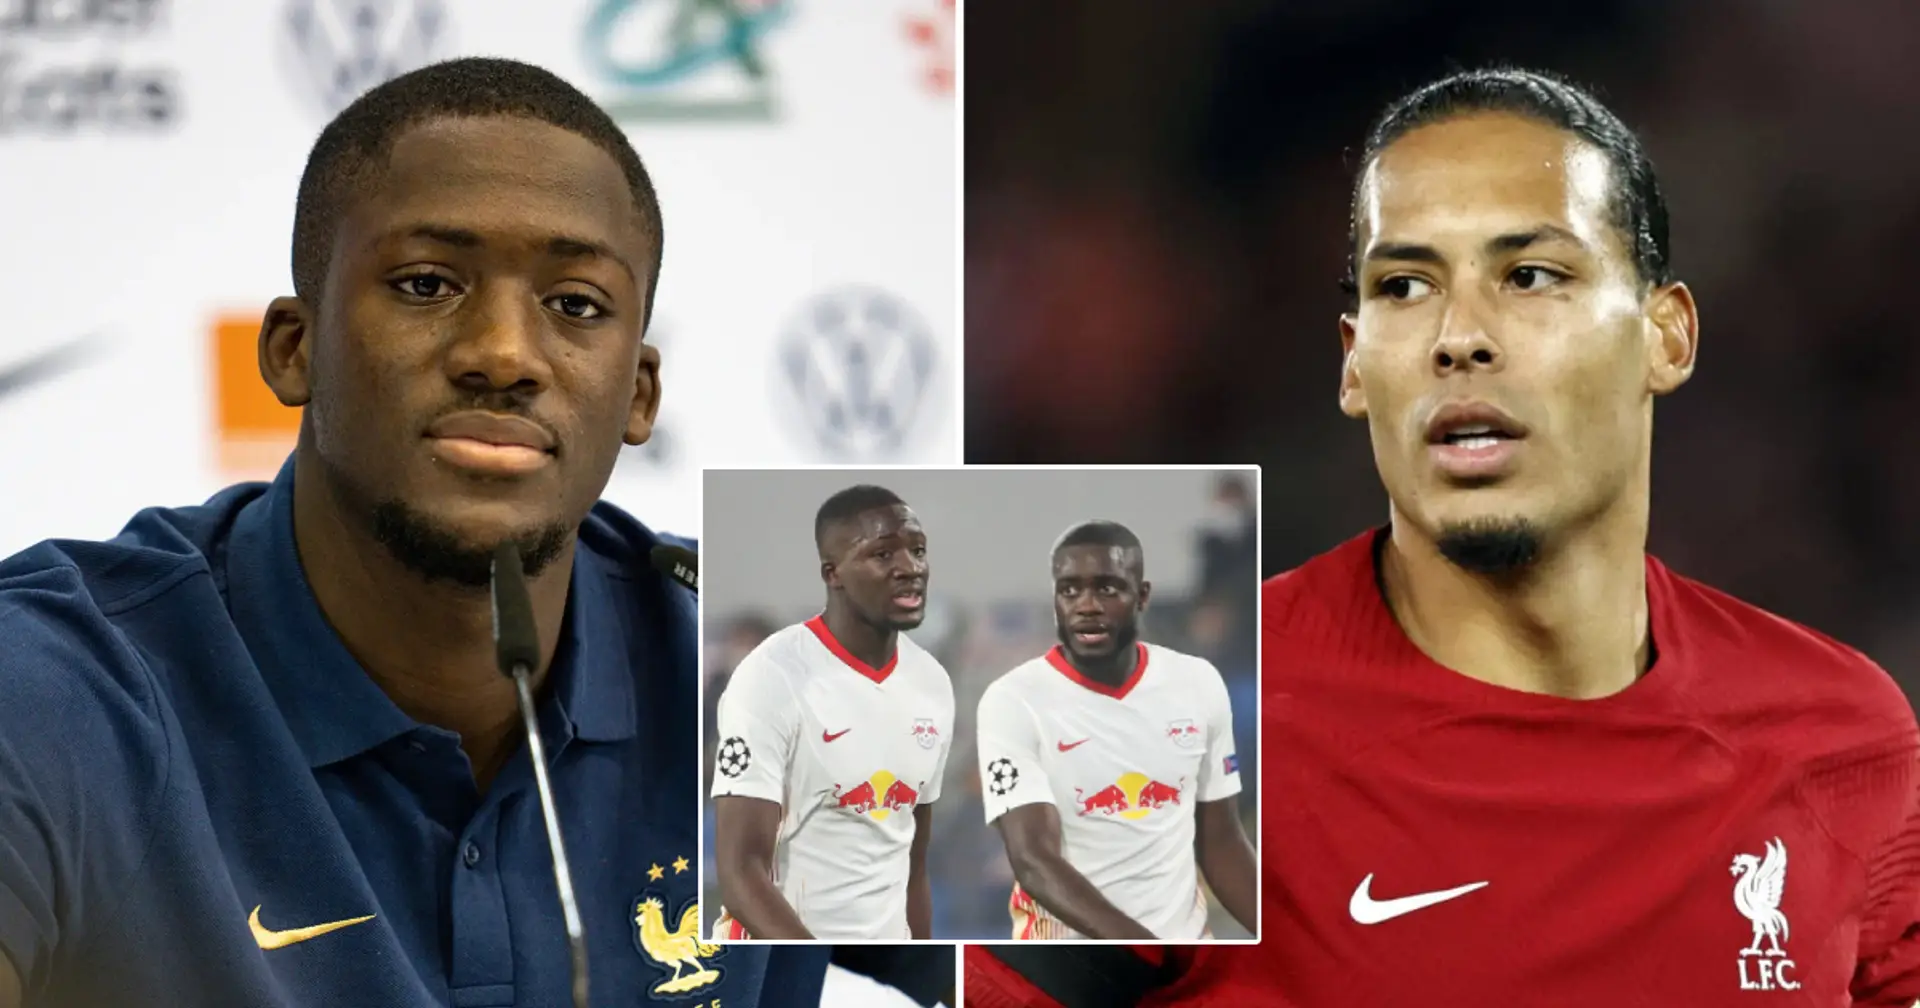 'What kind of question is that?': Konate when asked to compare Van Dijk to former teammate Upamecano